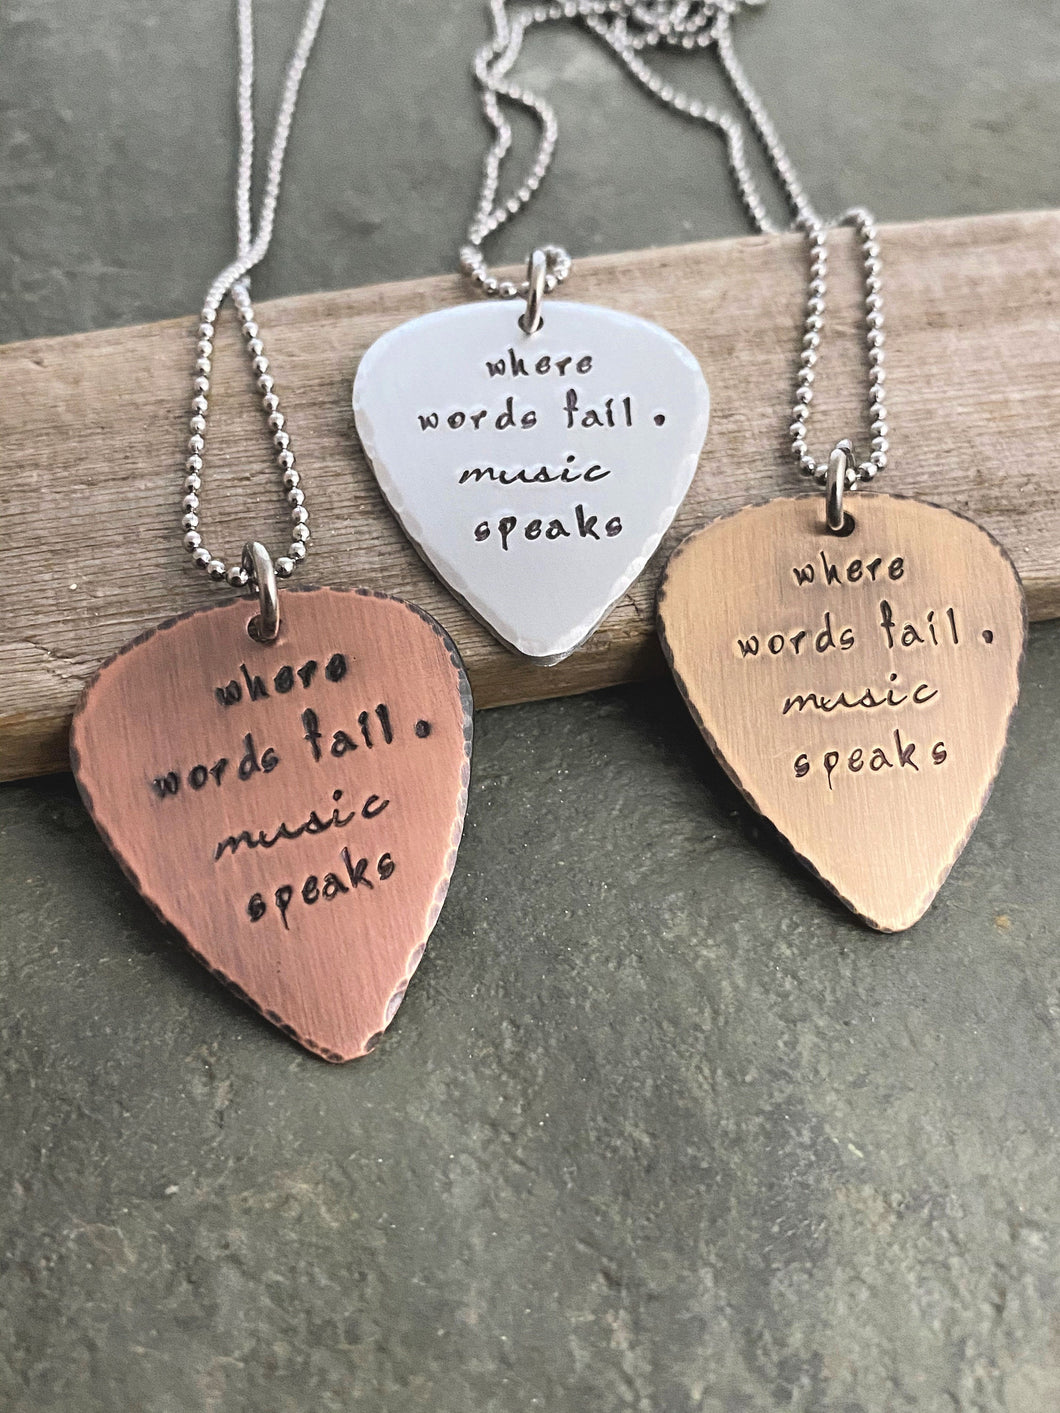 where words fail, music speaks - Hand stamped copper guitar pick necklace - stainless steel ball chain - gift for music lover - music style